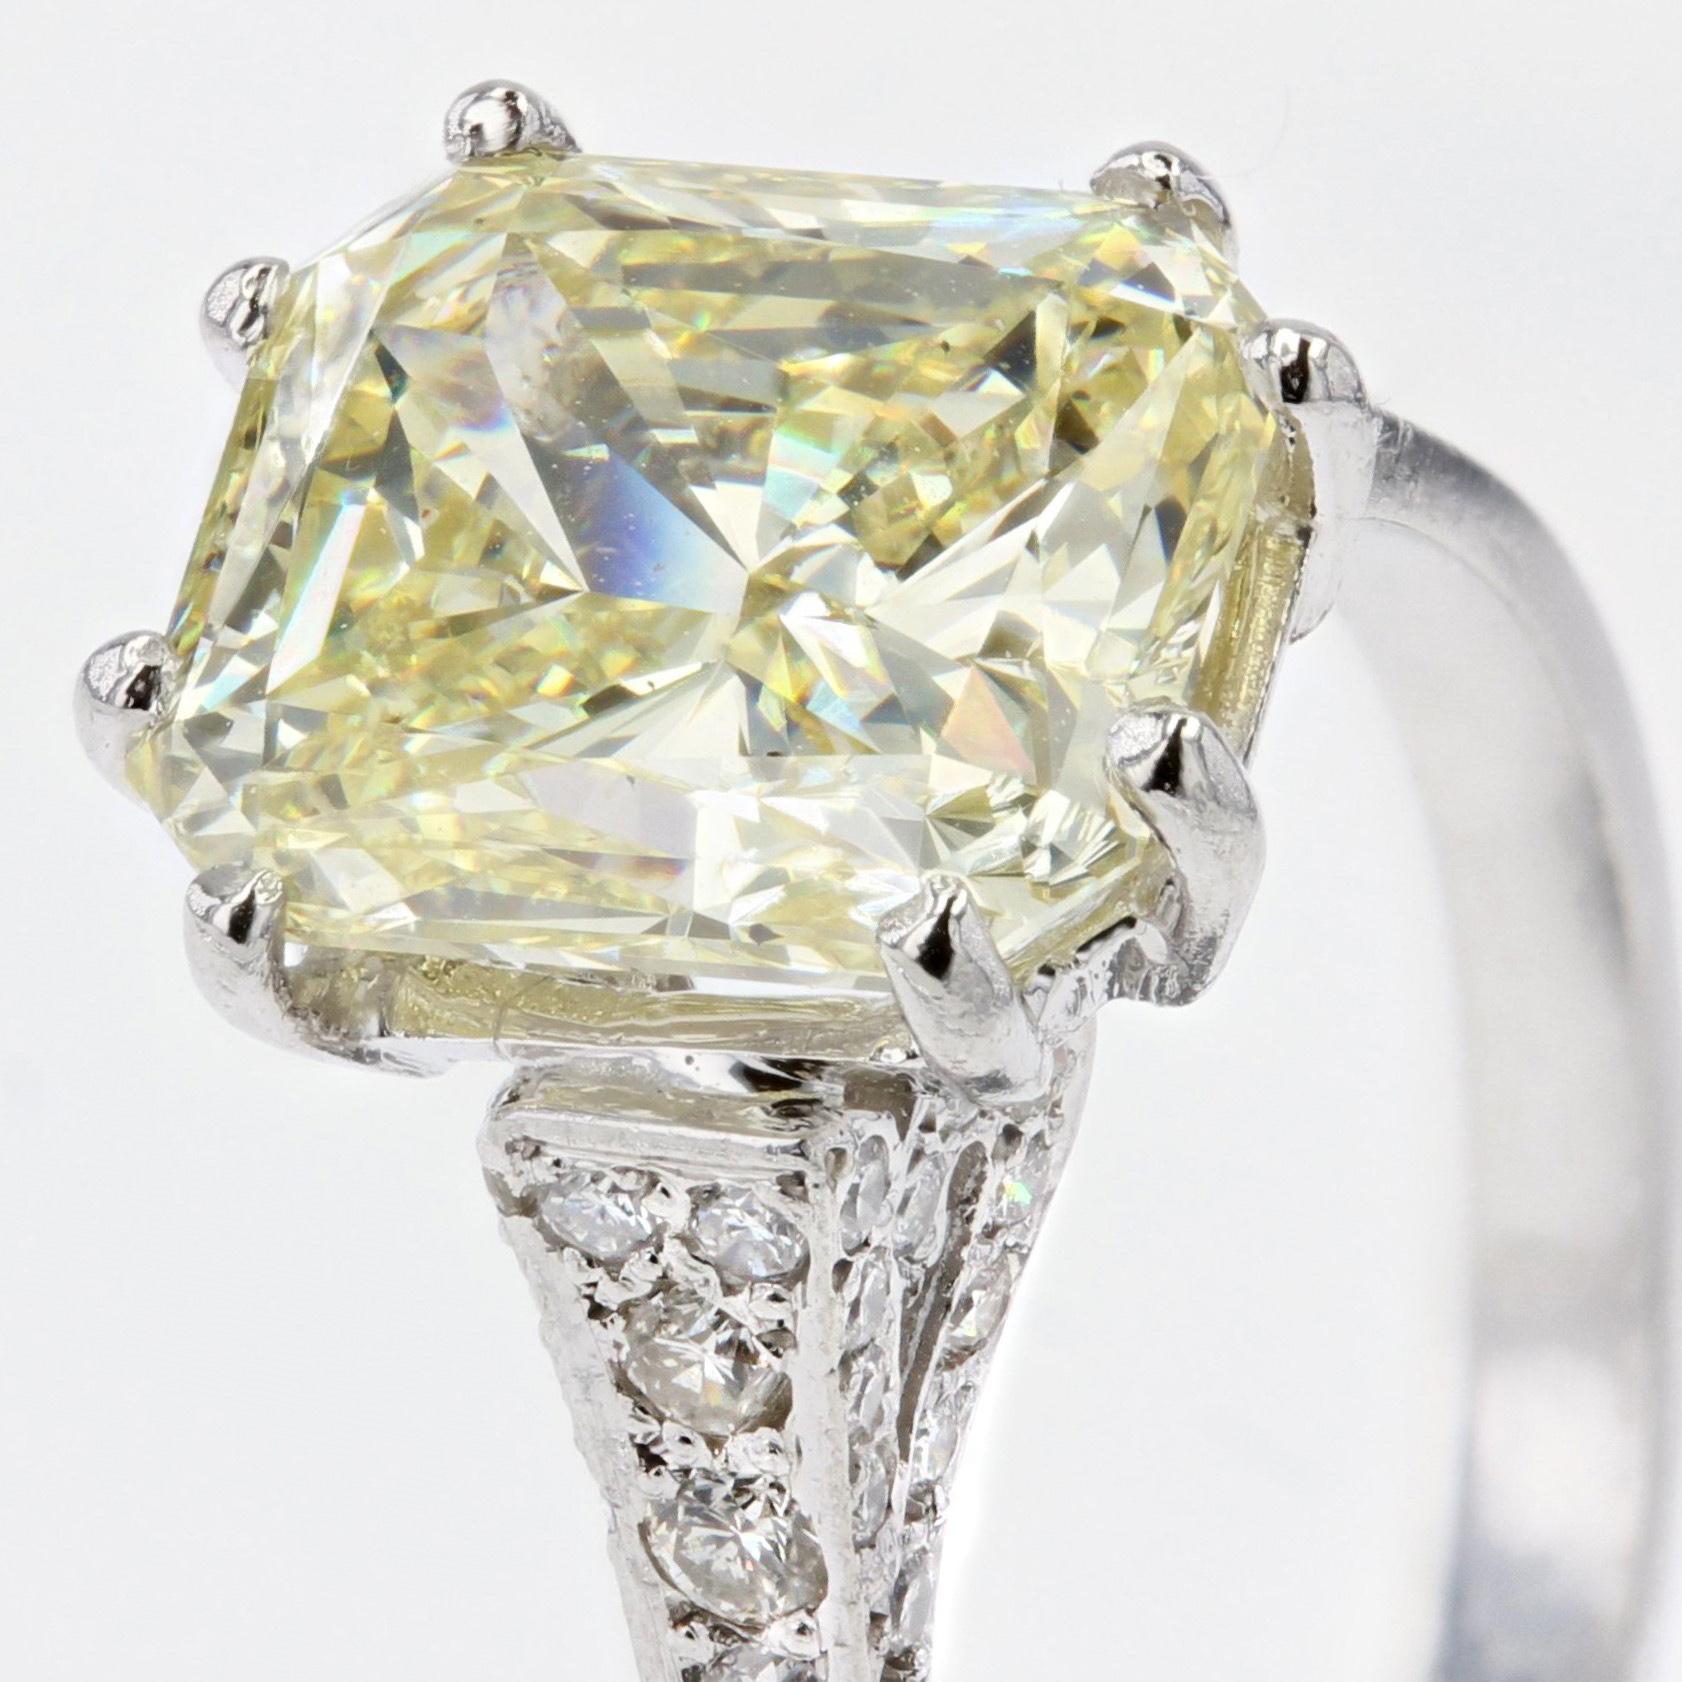 French 3.65 Carat Fancy Yellow Emerald Cut Diamond Platinum Ring For Sale 3